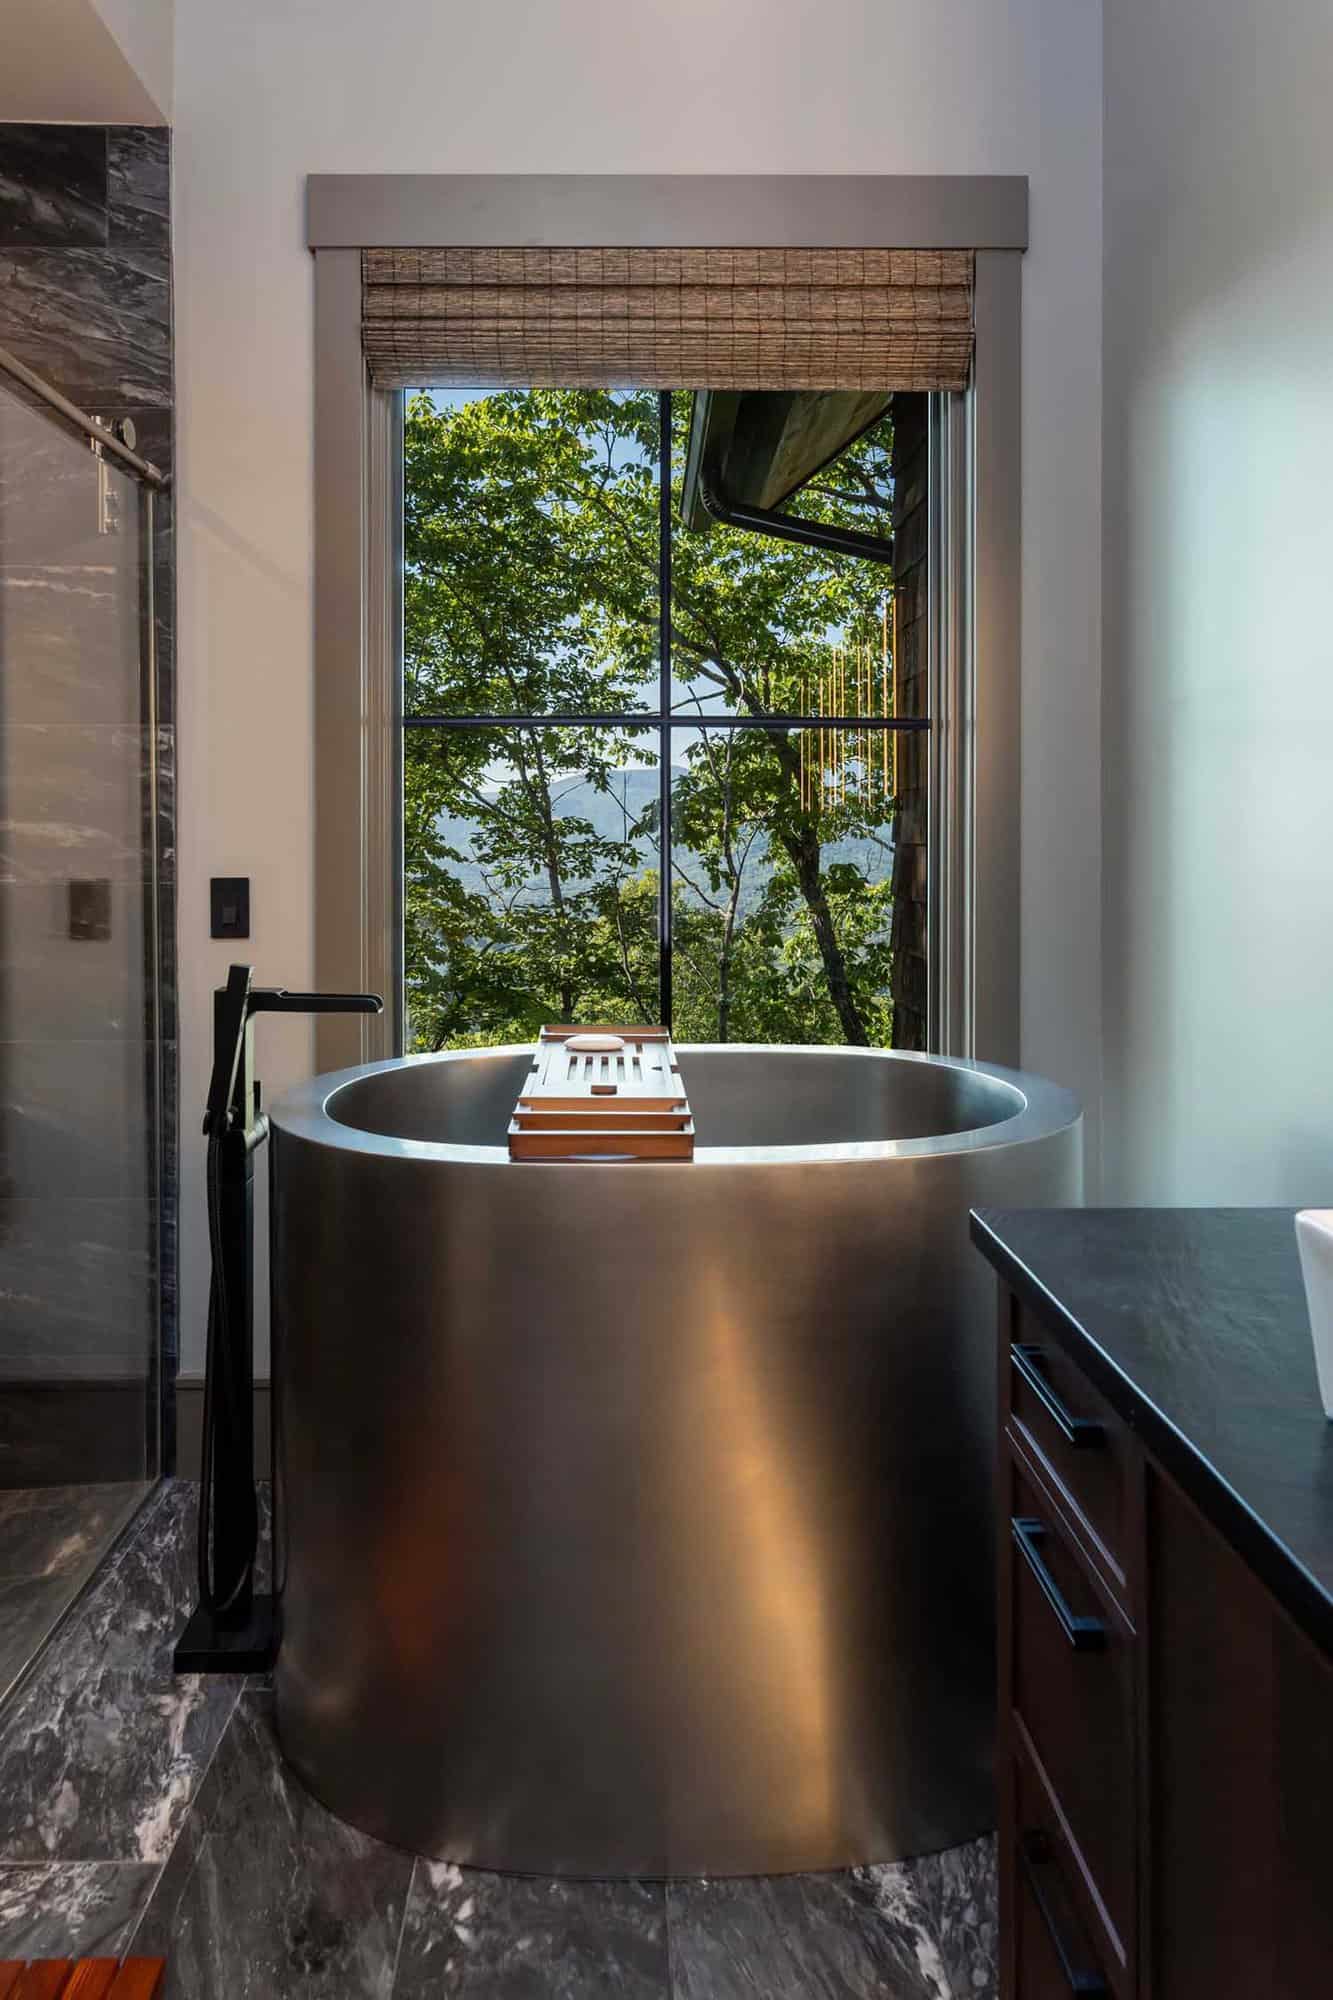 craftsman-style-bathroom-with-a-stainless-steel-japanese-soaking-tub